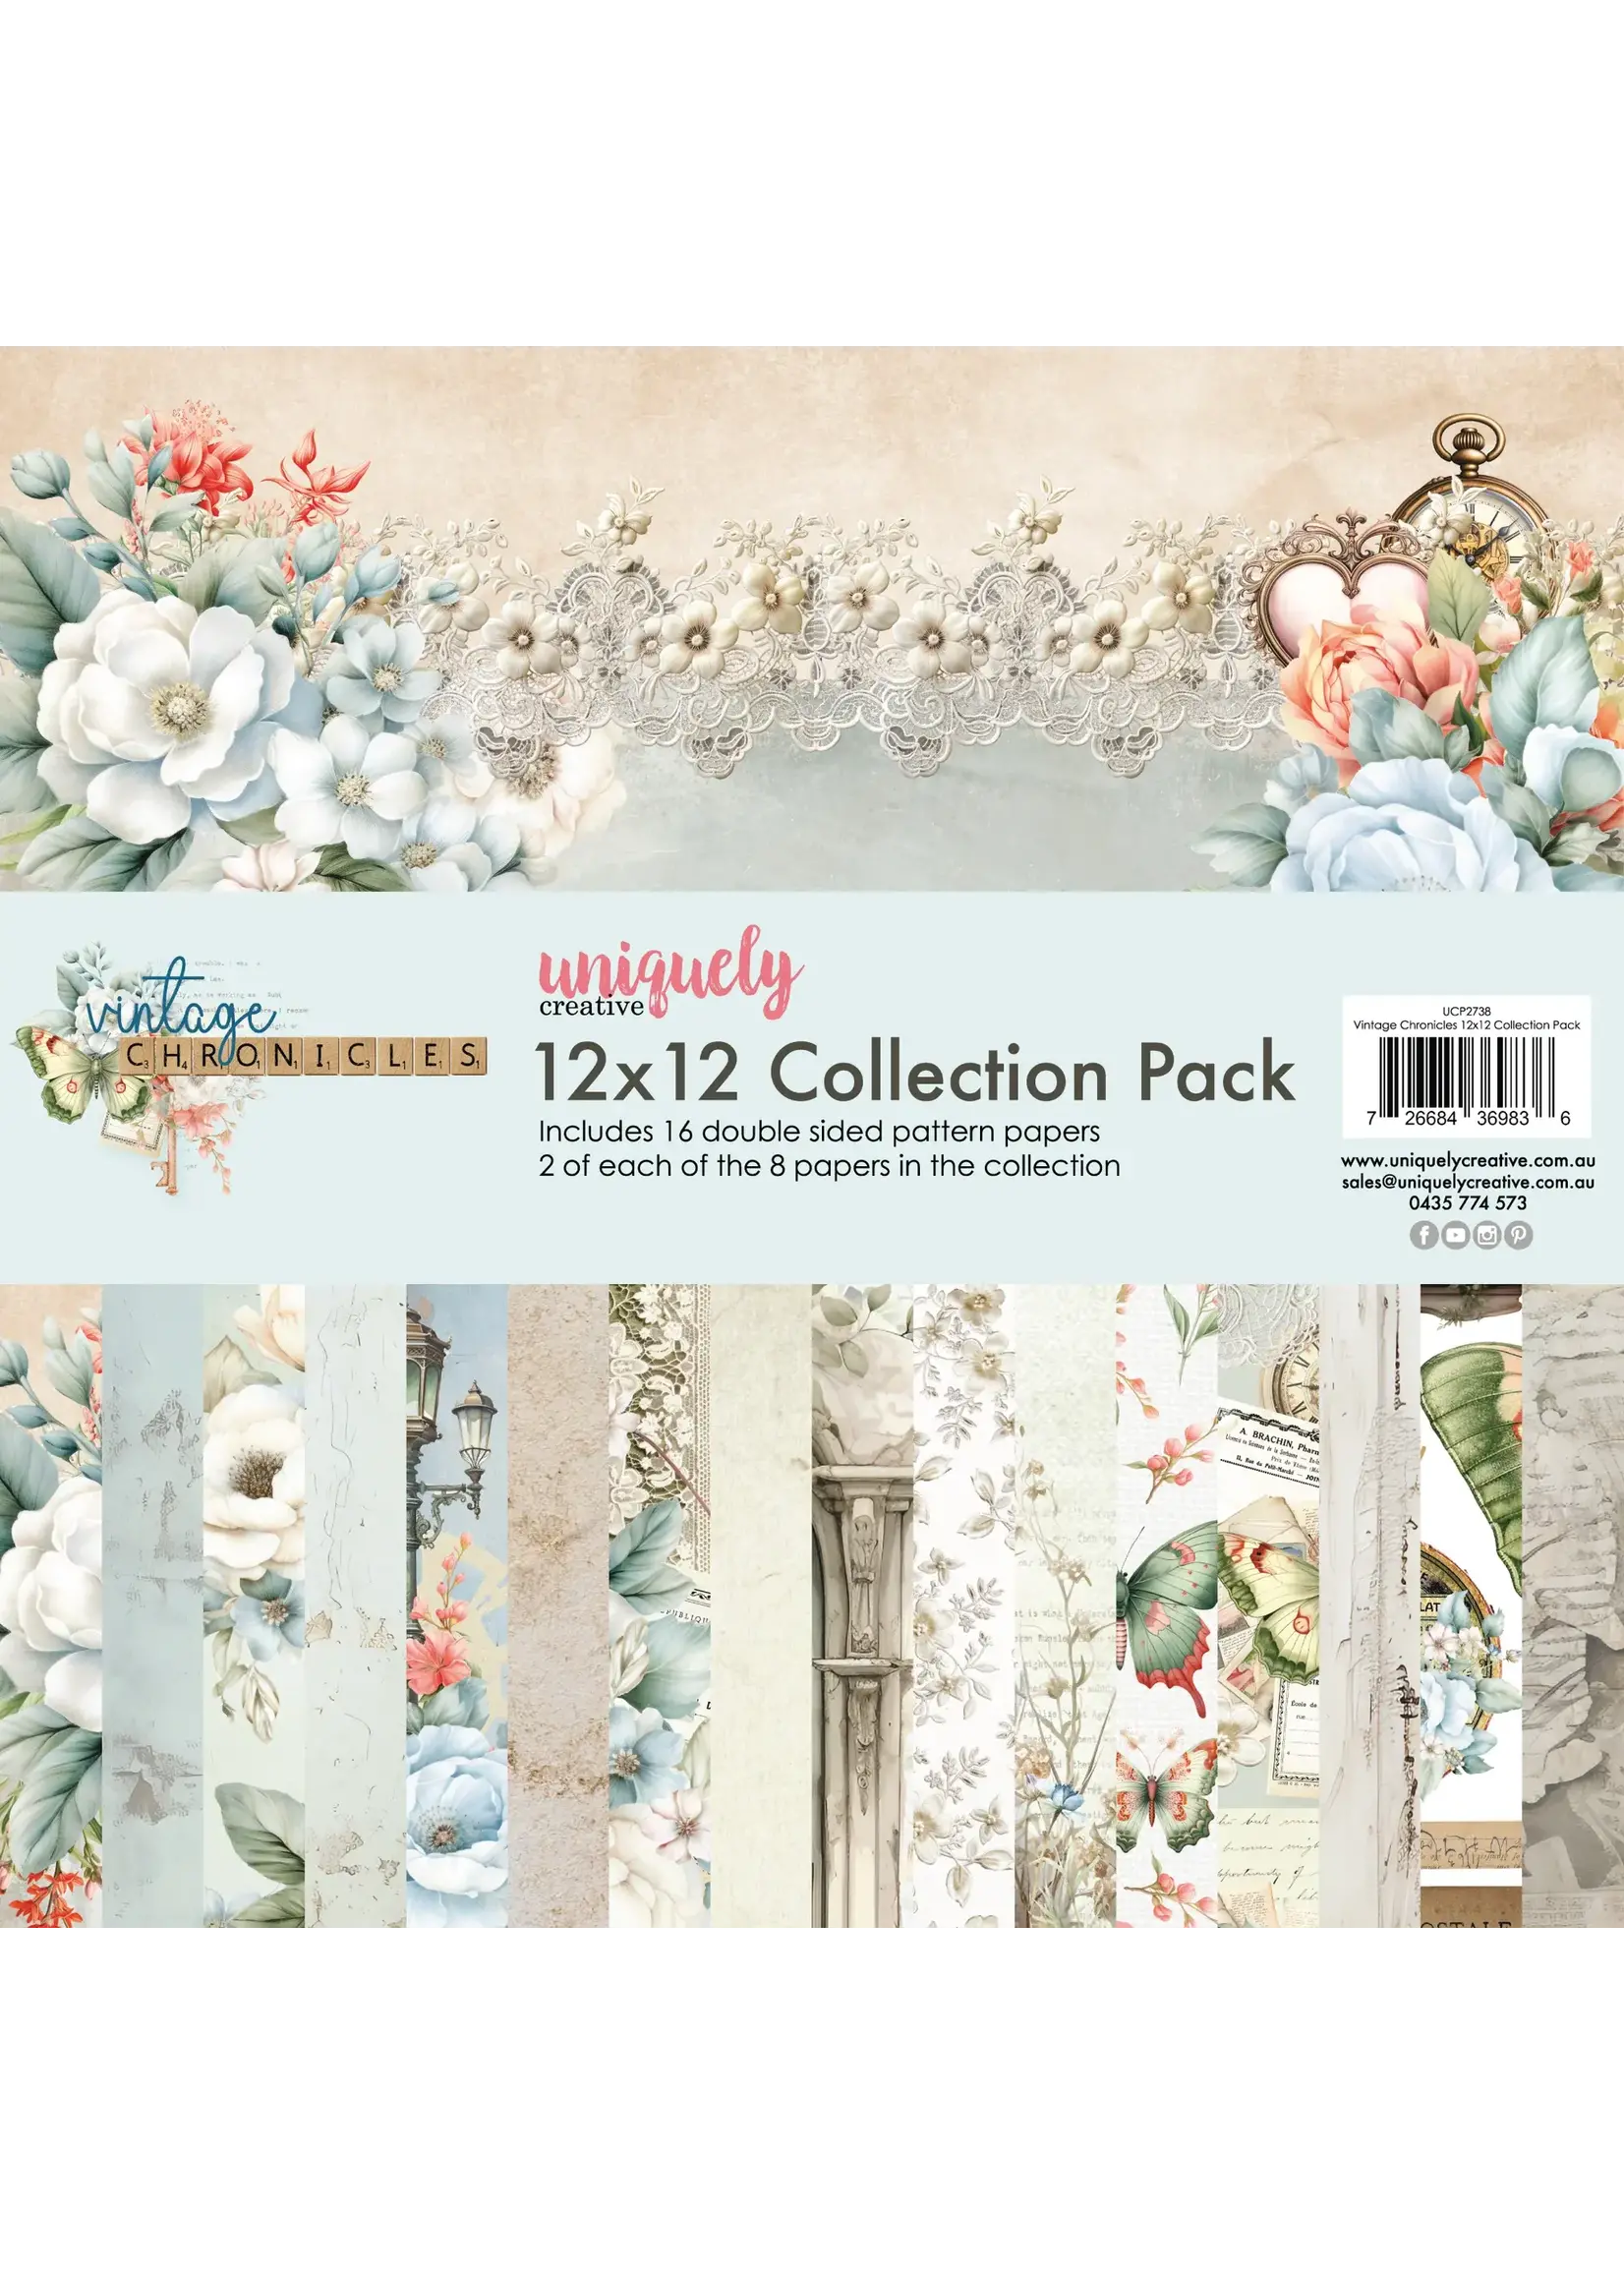 Uniquely Creative Vintage Chronicles 12x12 Collection Pack